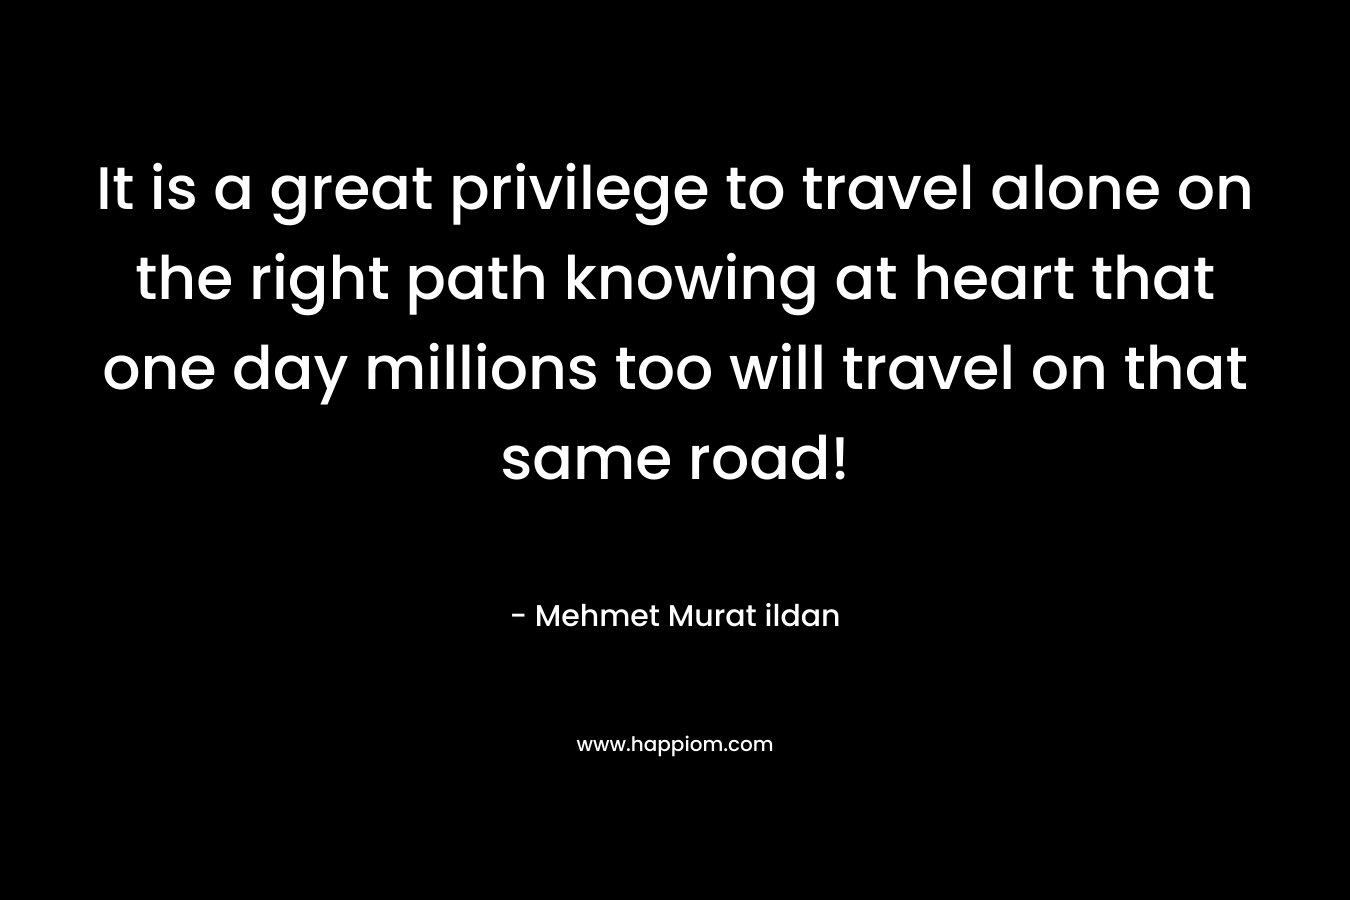 It is a great privilege to travel alone on the right path knowing at heart that one day millions too will travel on that same road!